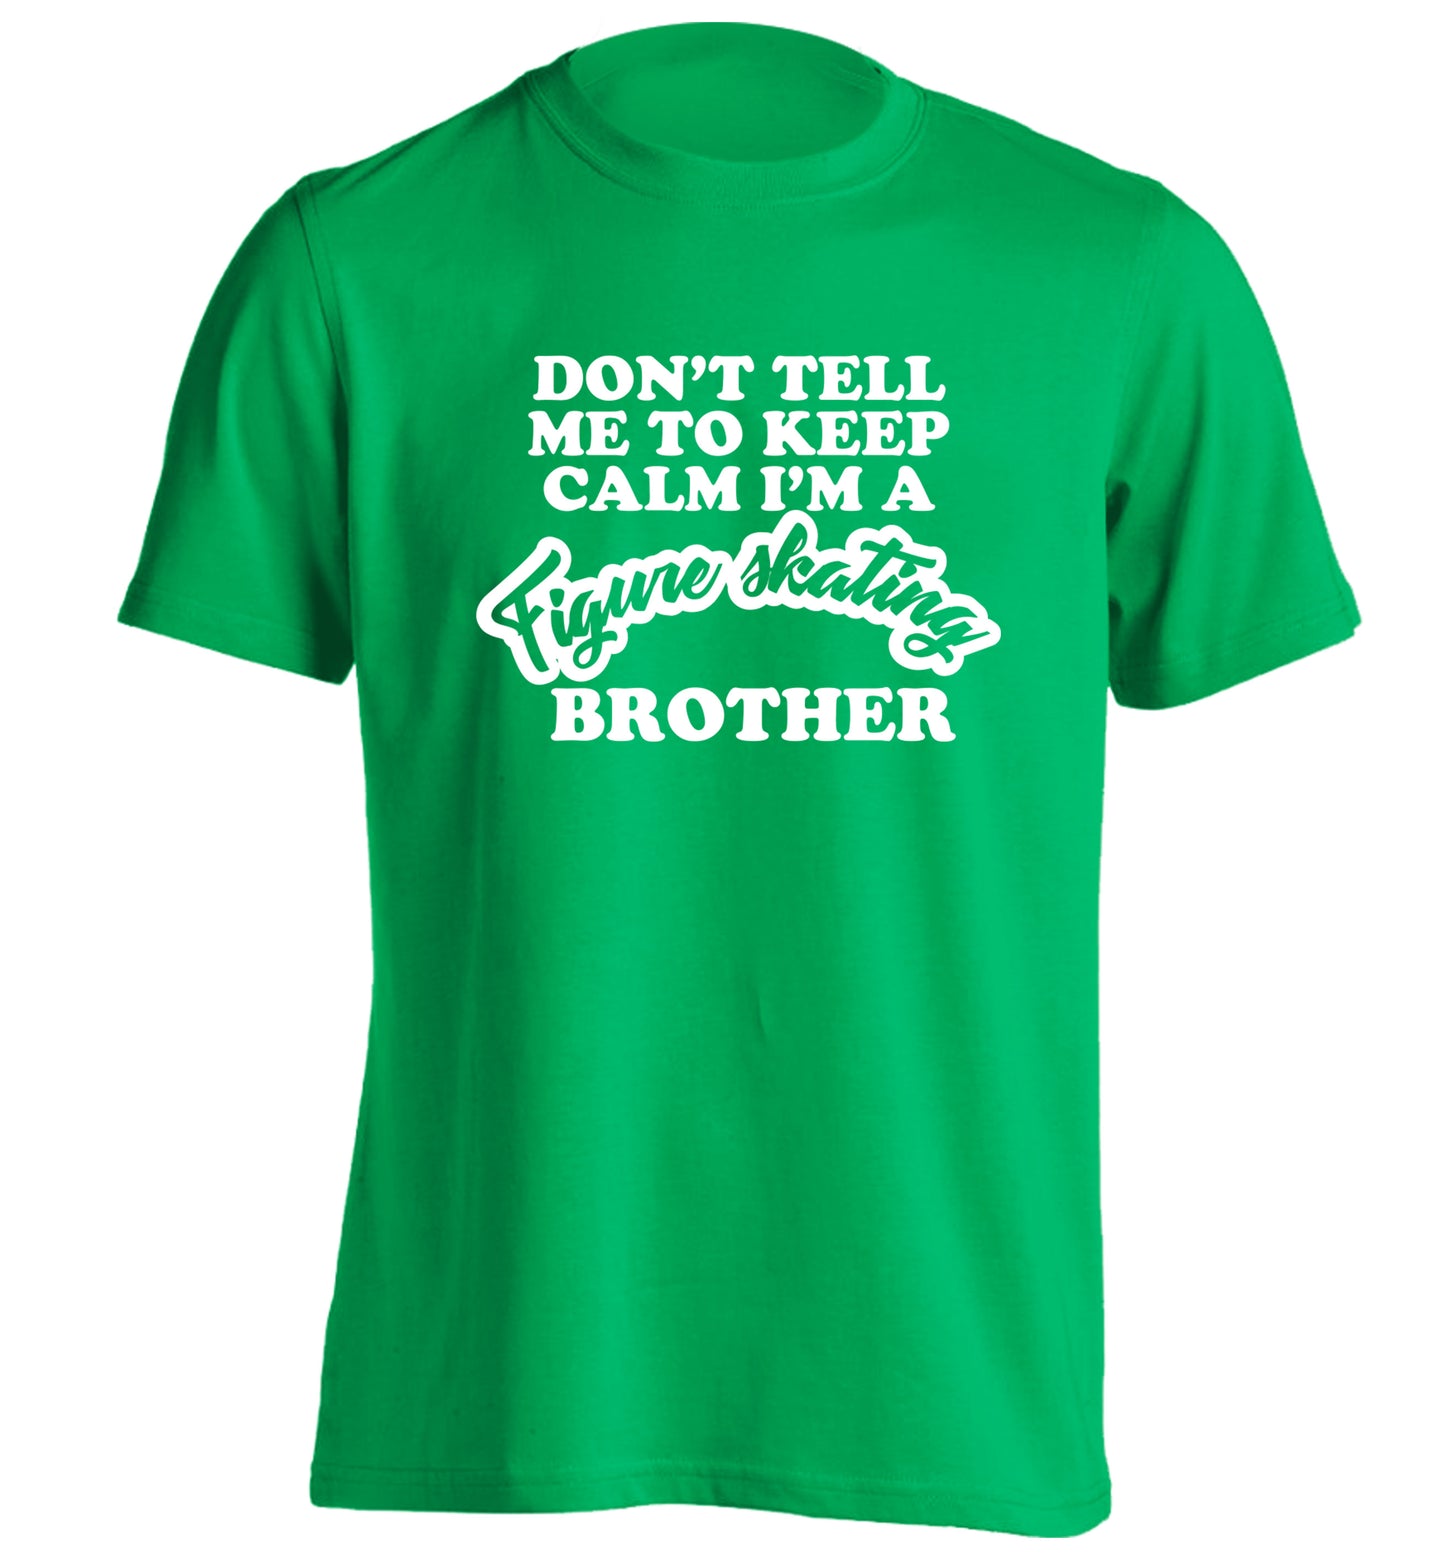 Don't tell me to keep calm I'm a figure skating brother adults unisexgreen Tshirt 2XL